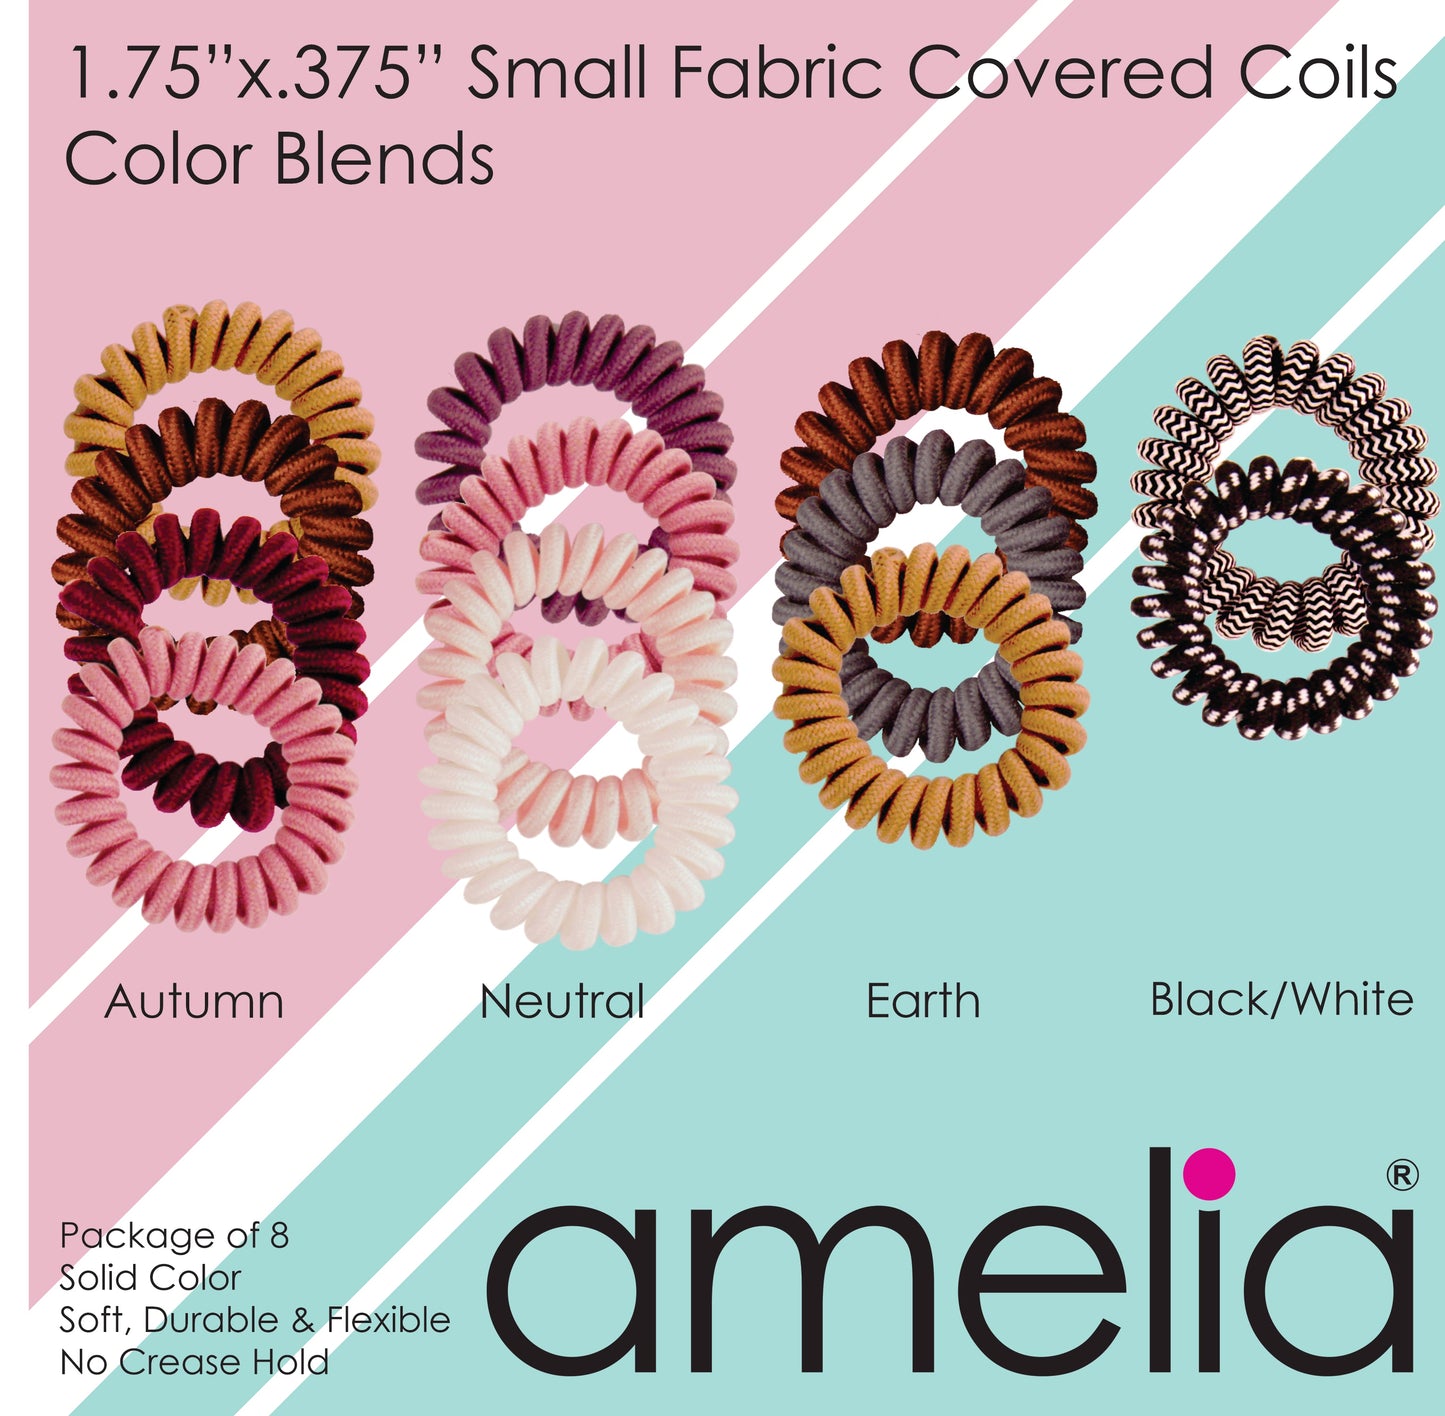 Amelia Beauty, 8 Small Fabric Wrapped Elastic Hair Coils, 1.75in Diameter Spiral Hair Ties, Gentle on Hair, Strong Hold and Minimizes Dents and Creases, Mauve